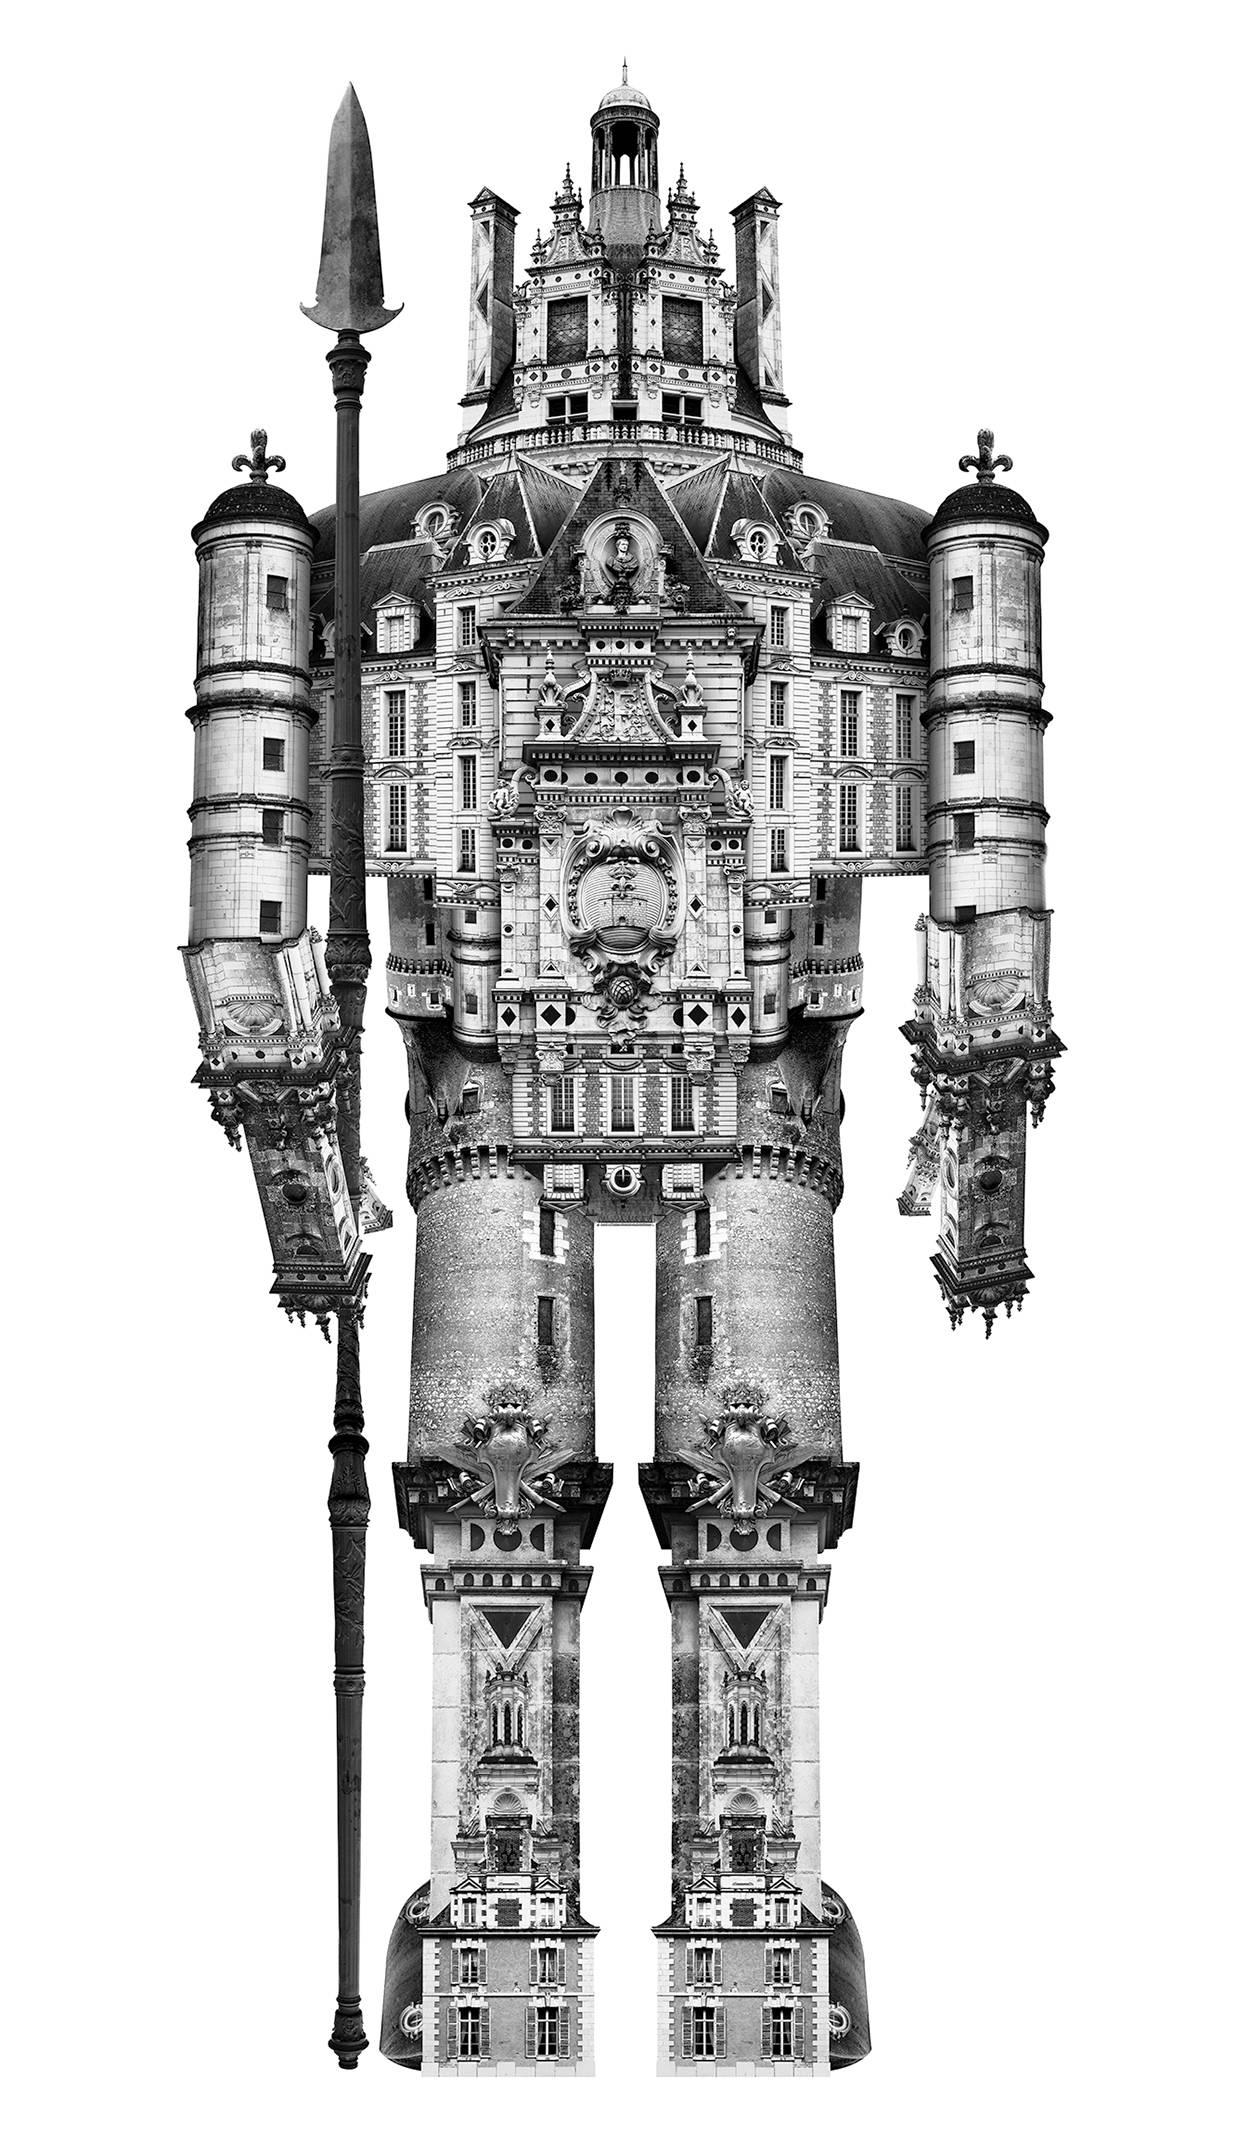 Joel Kuntz Black and White Photograph - Robot made with iconic buildings of a French castle, Architectural robot